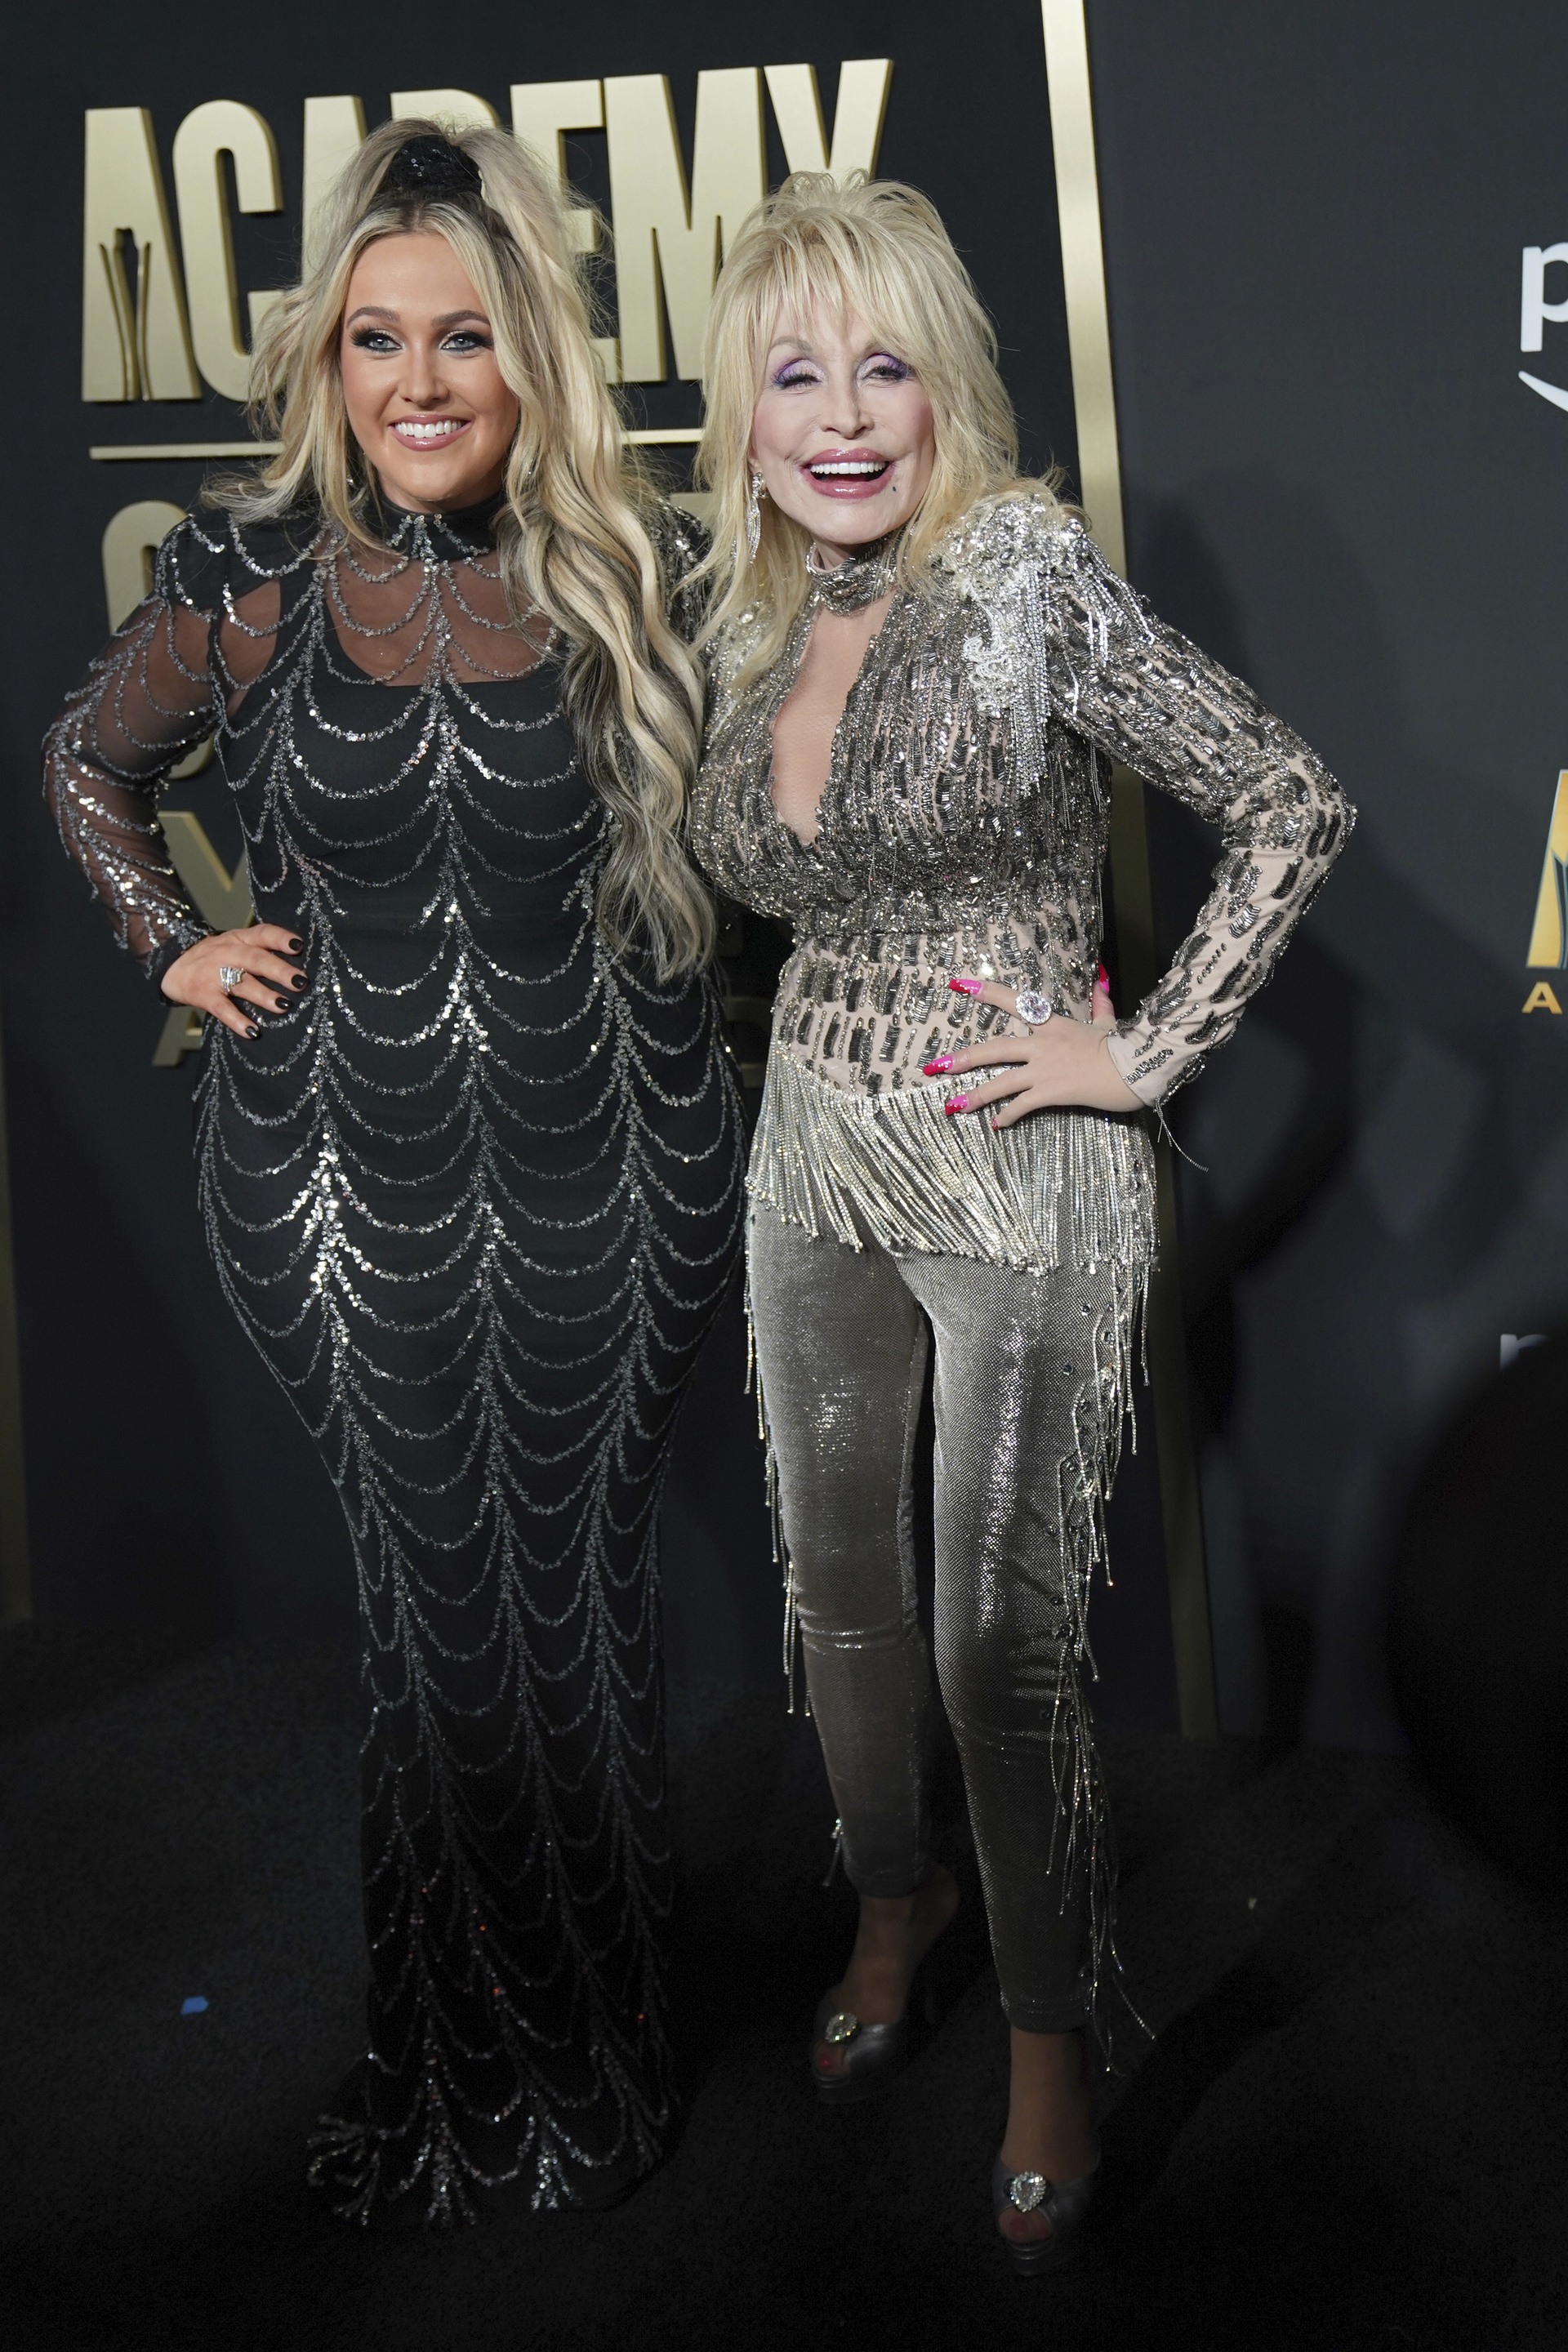 Priscilla Block, left, and Dolly Parton arrive at the awards.